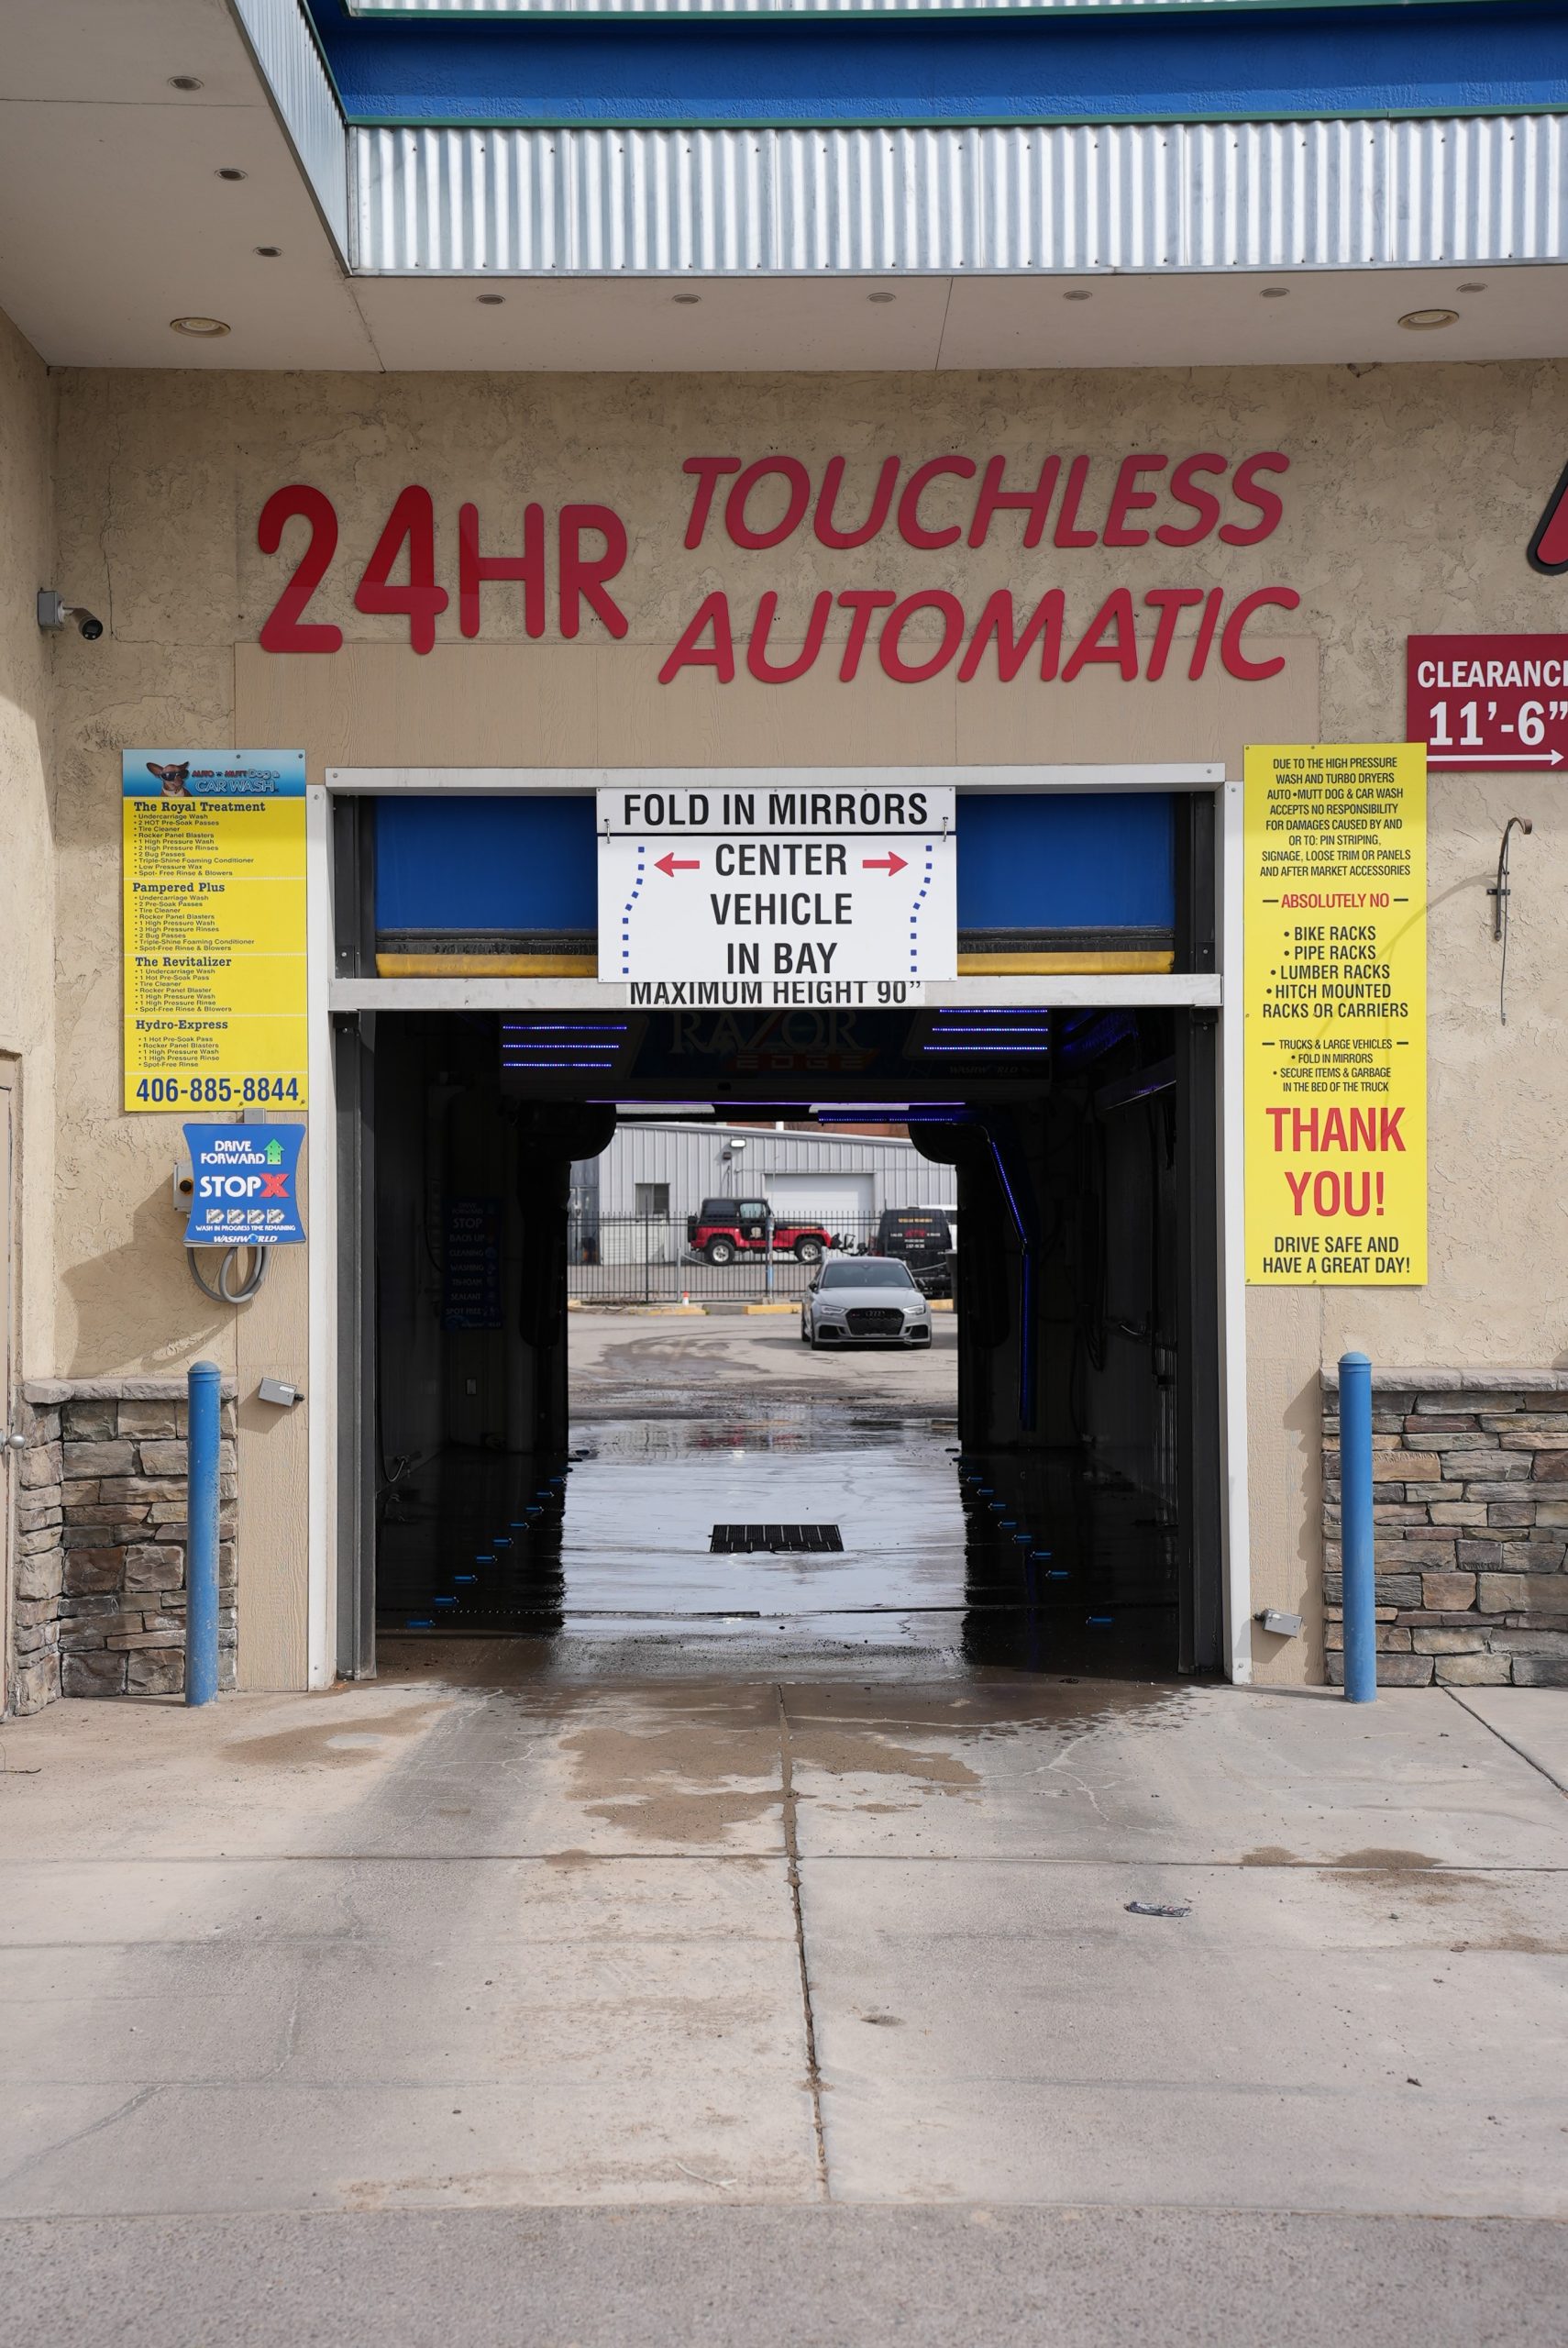 Touchless Car Wash- Treat Your Vehicle Right Today!